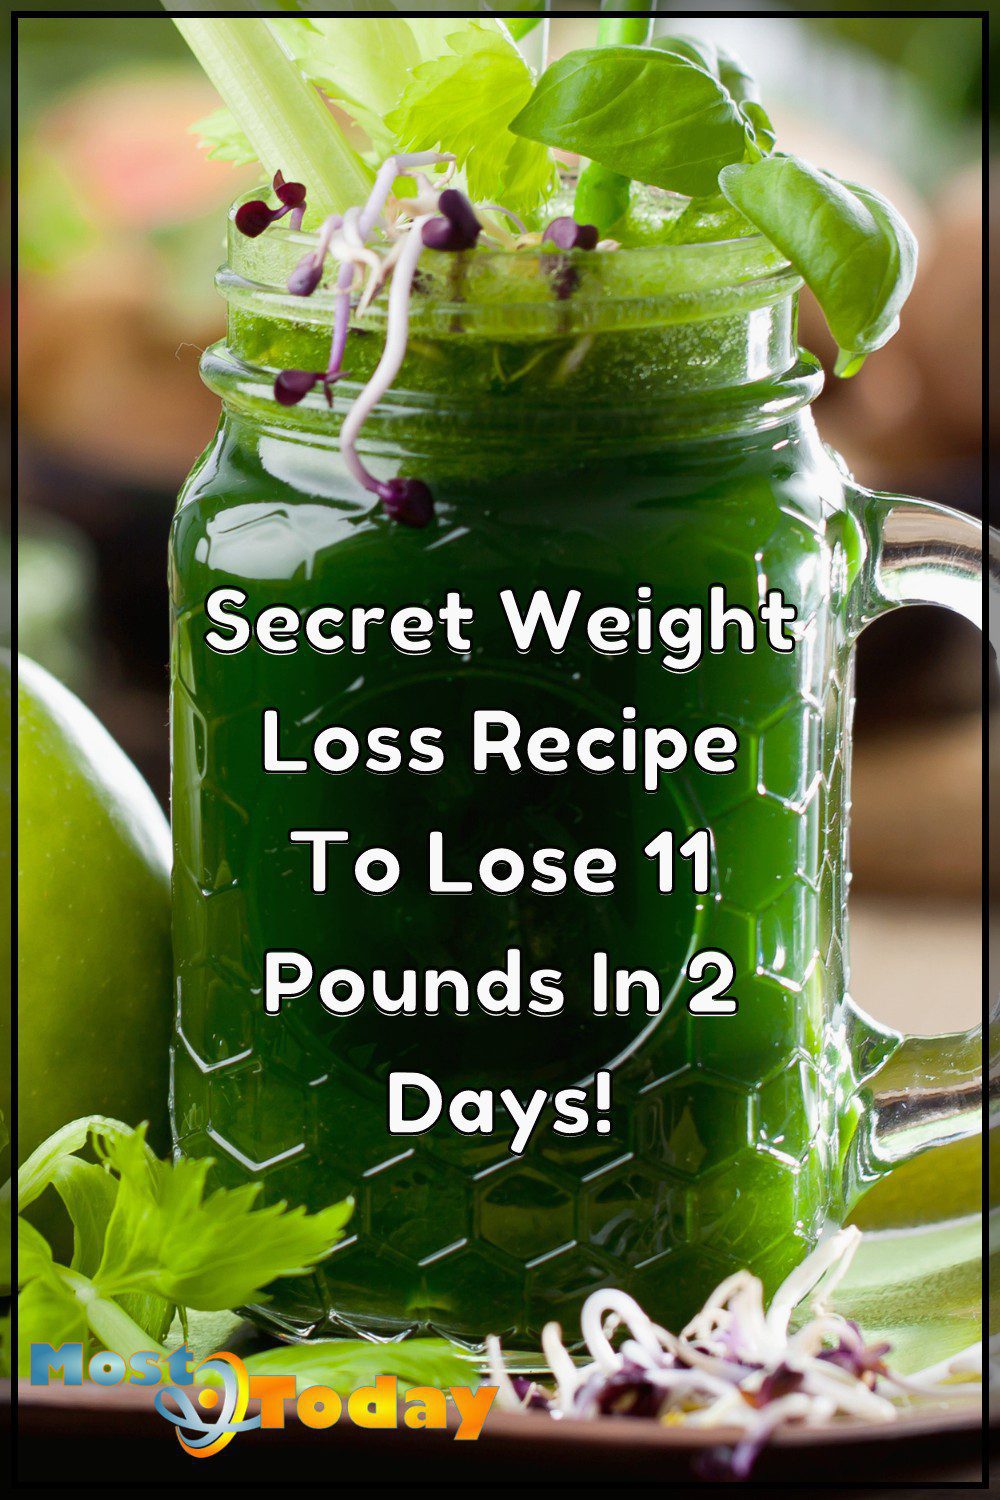 How To Weight Loss In Only 2 Days! With Secret Weight Loss Recipe